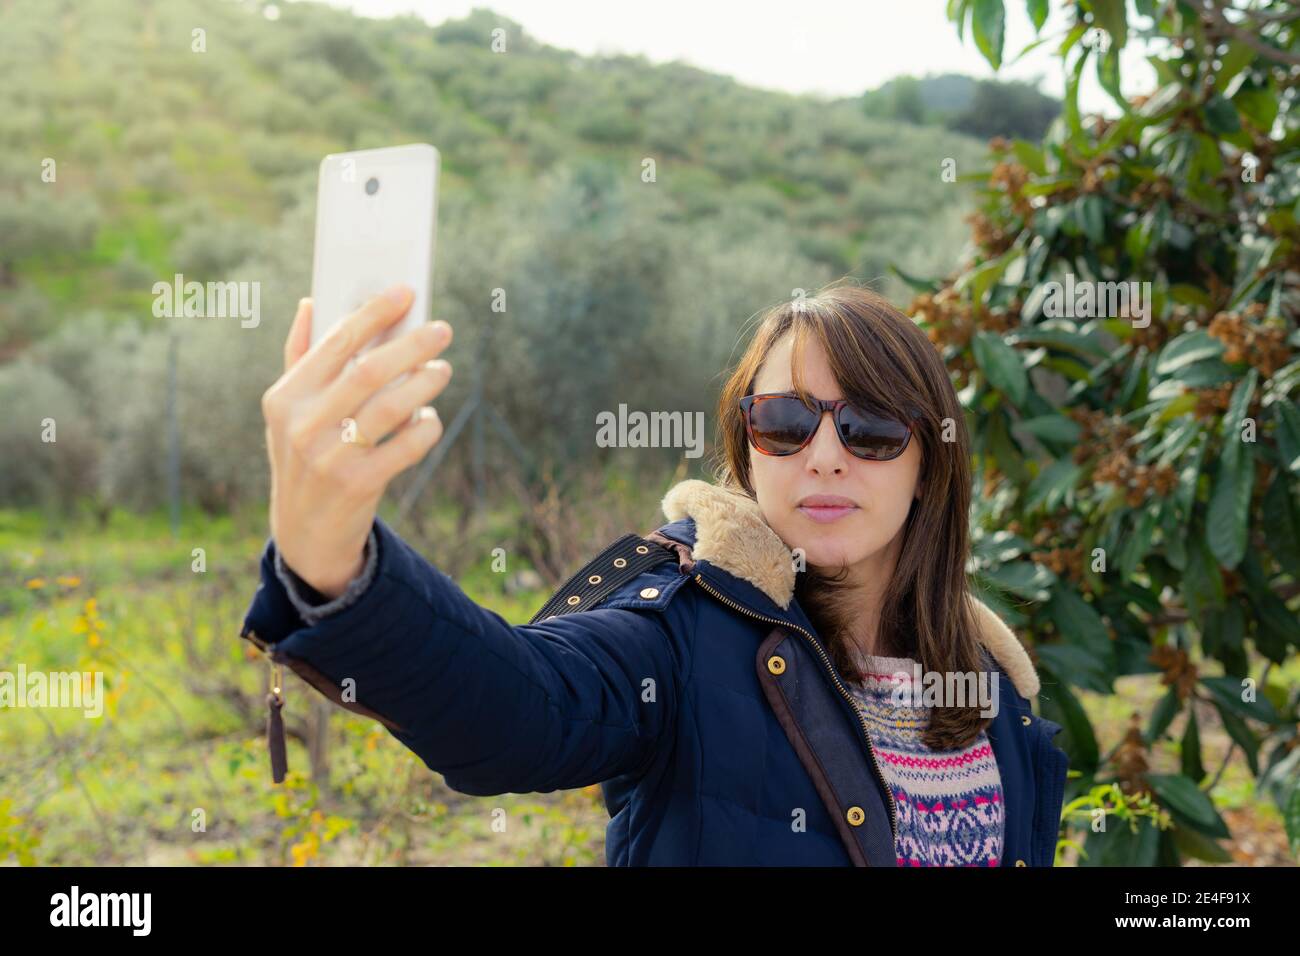 woman takes a selfie in the countryside, wearing a coat and sunglasses. She is smiling and happy. Stock Photo